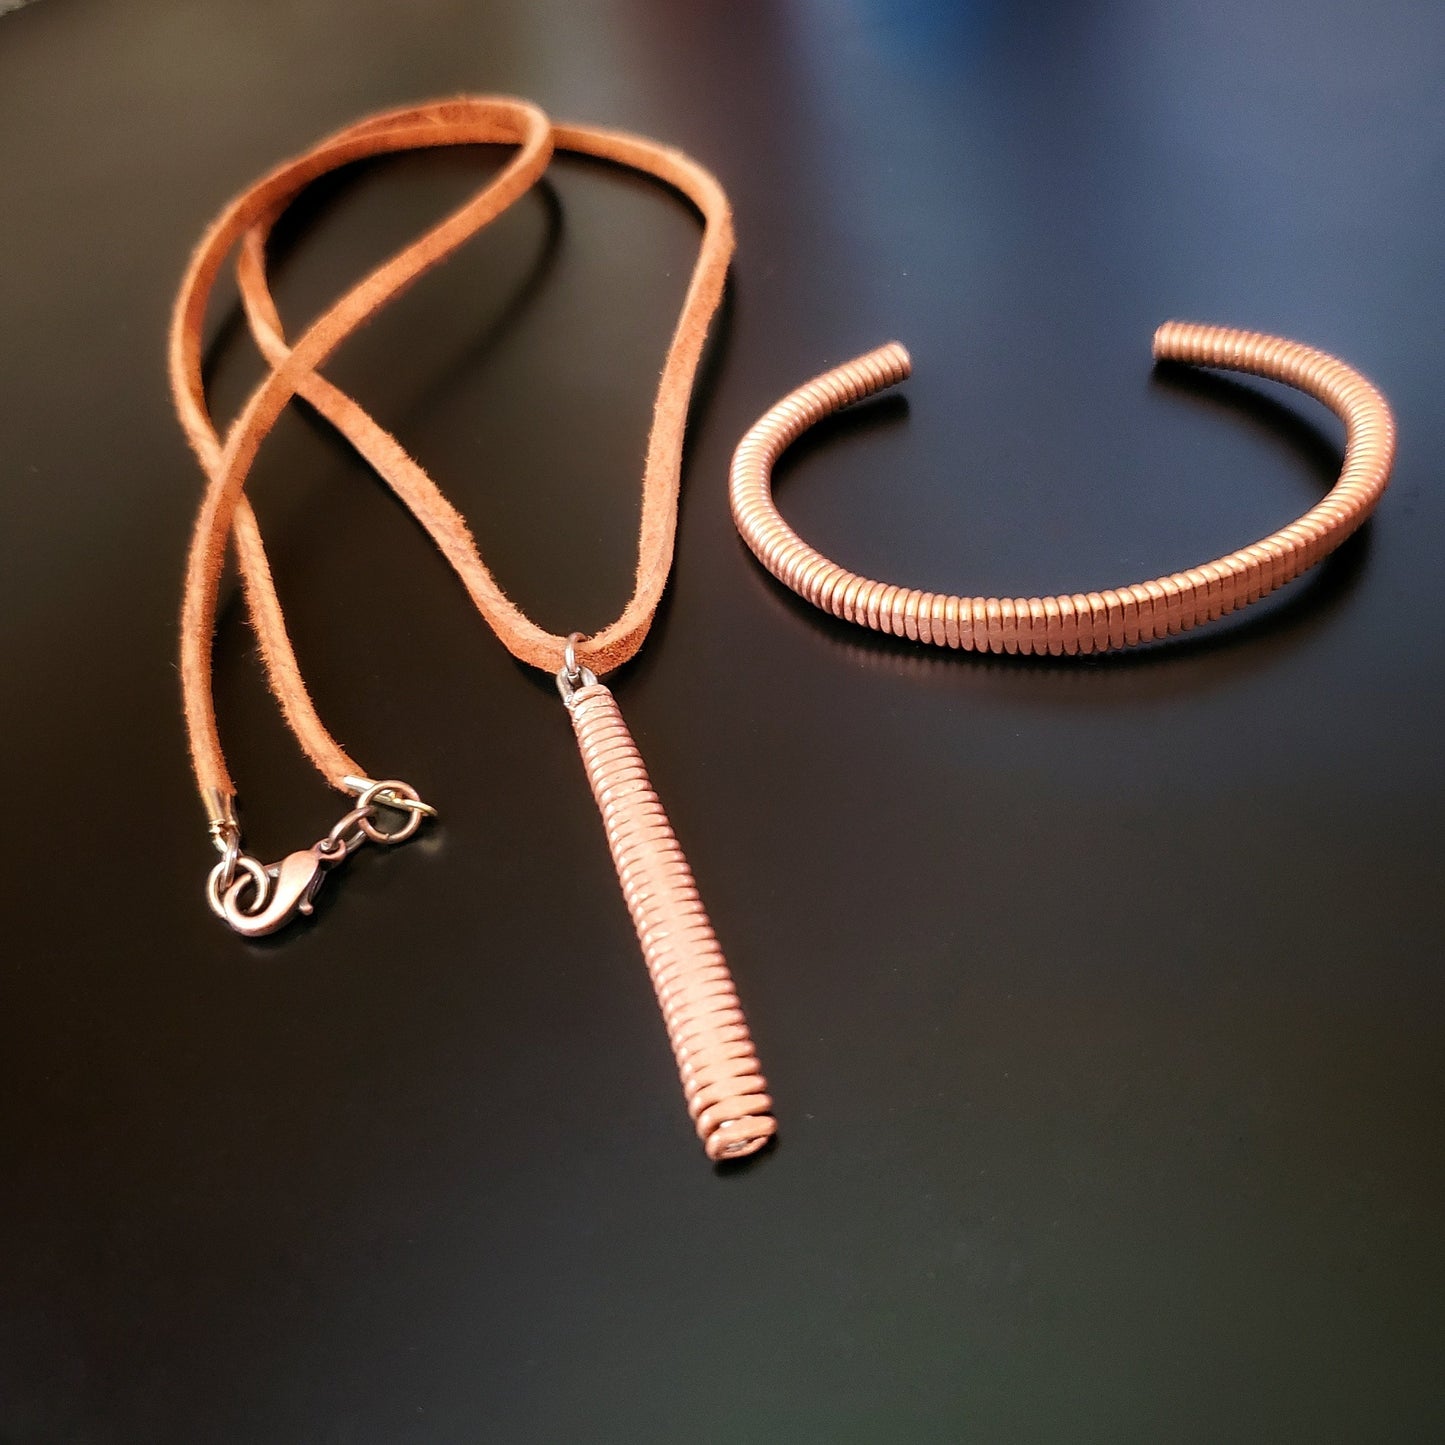 a clasp style bracelet made from an upcycled copper piano string hammered flat on its left is a necklace made from a piece of hammered piano string and a piece of brown suede cord